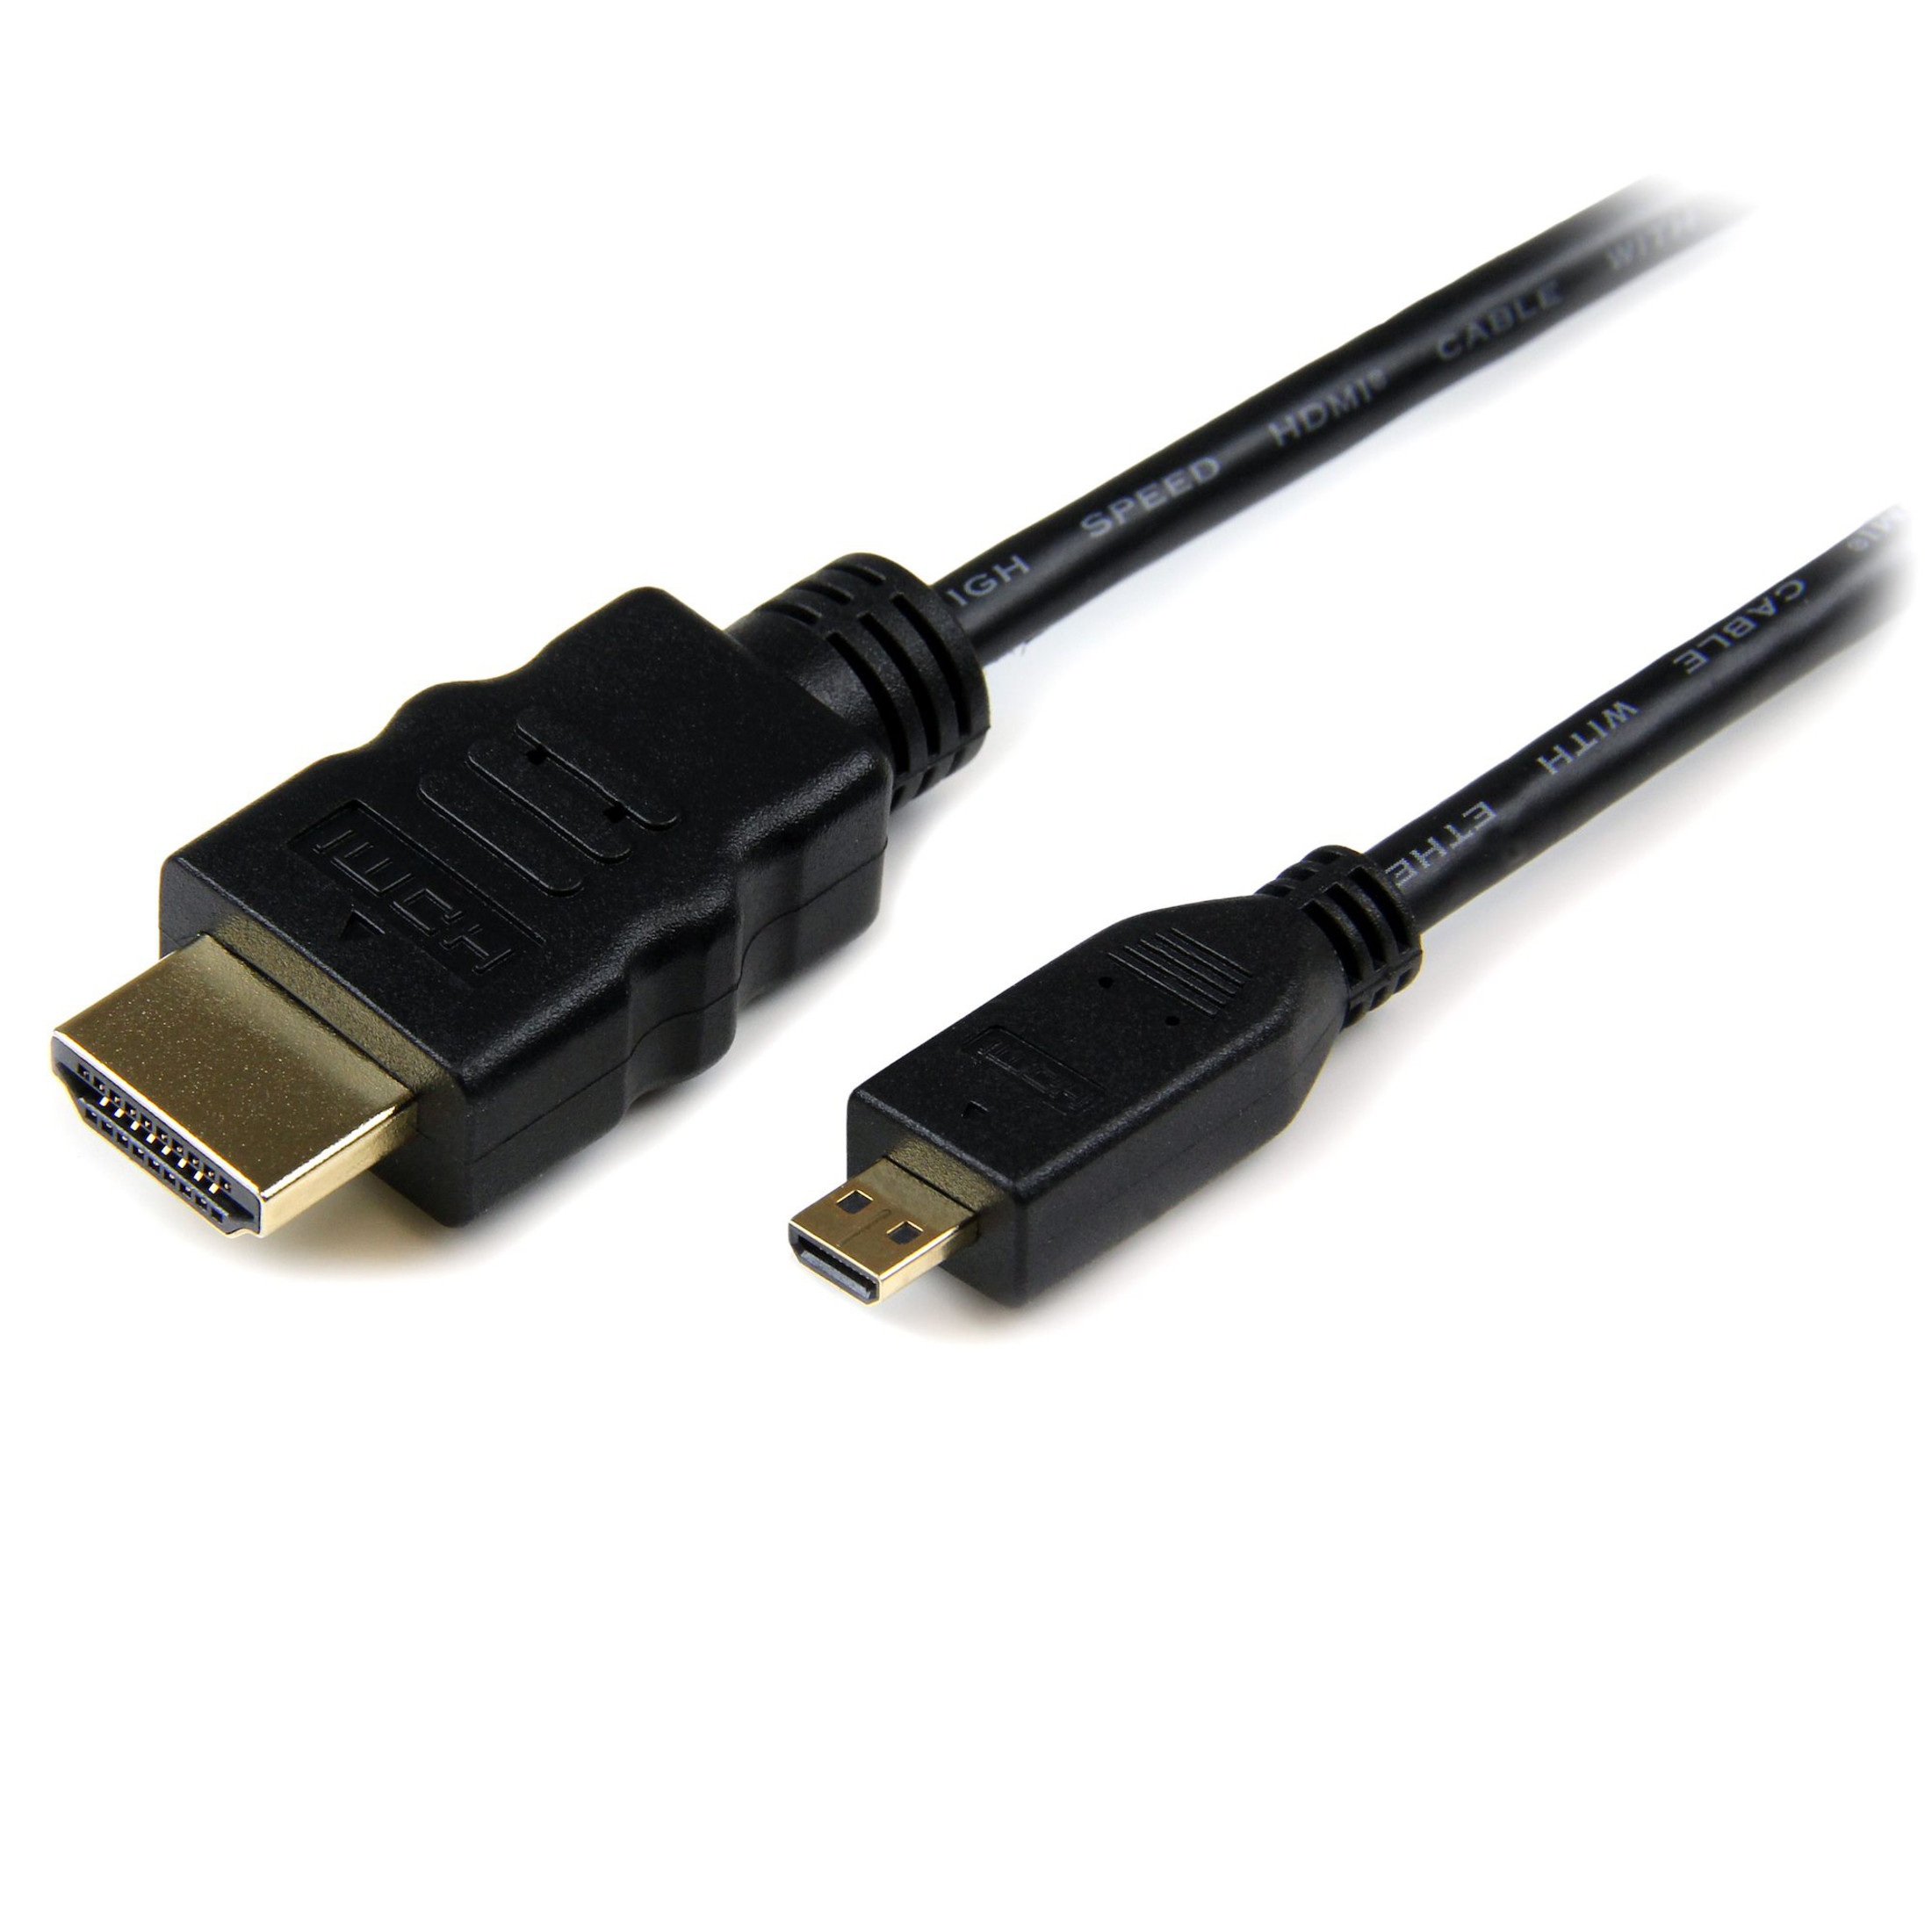 Startech .com 3m Micro HDMI to HDMI Cable with Ethernet, 4K High Speed Type-D Device to HDMI Monitor Adapter/Converter Cord3m High... HDADMM3M - Corporate Armor